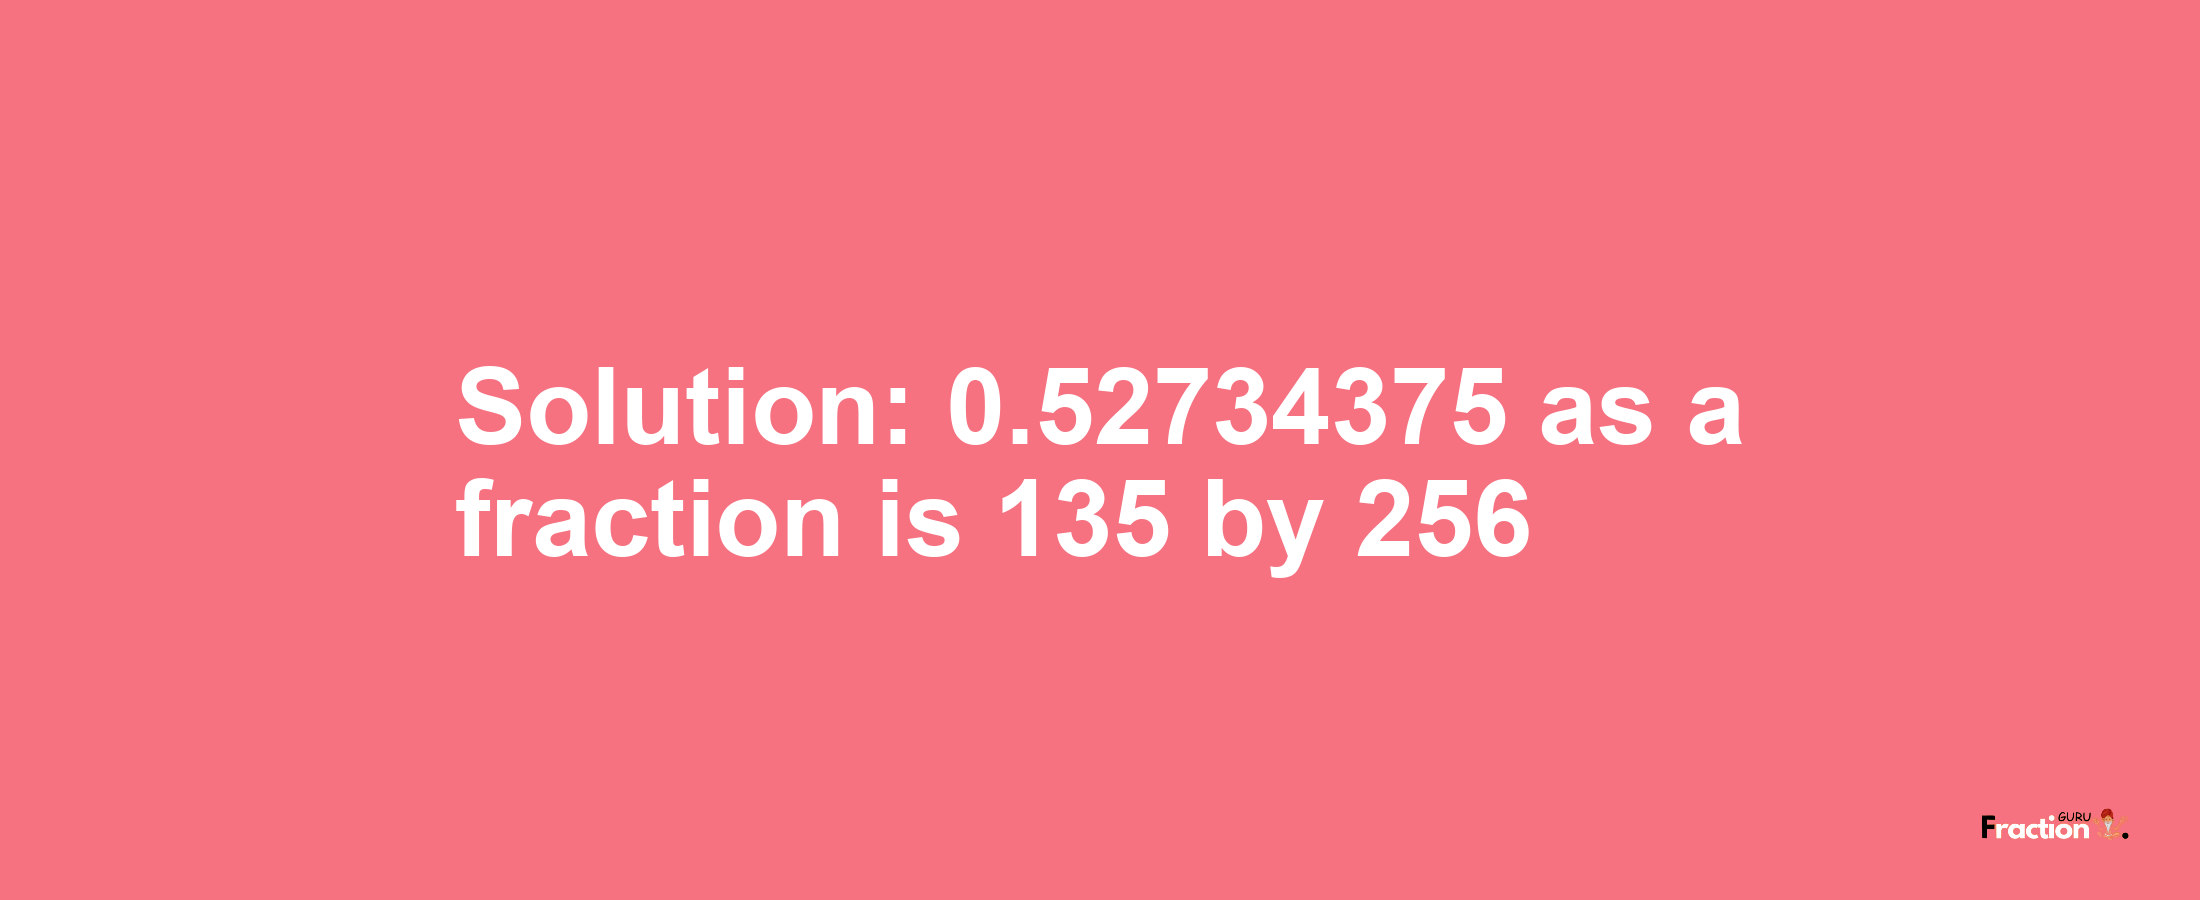 Solution:0.52734375 as a fraction is 135/256